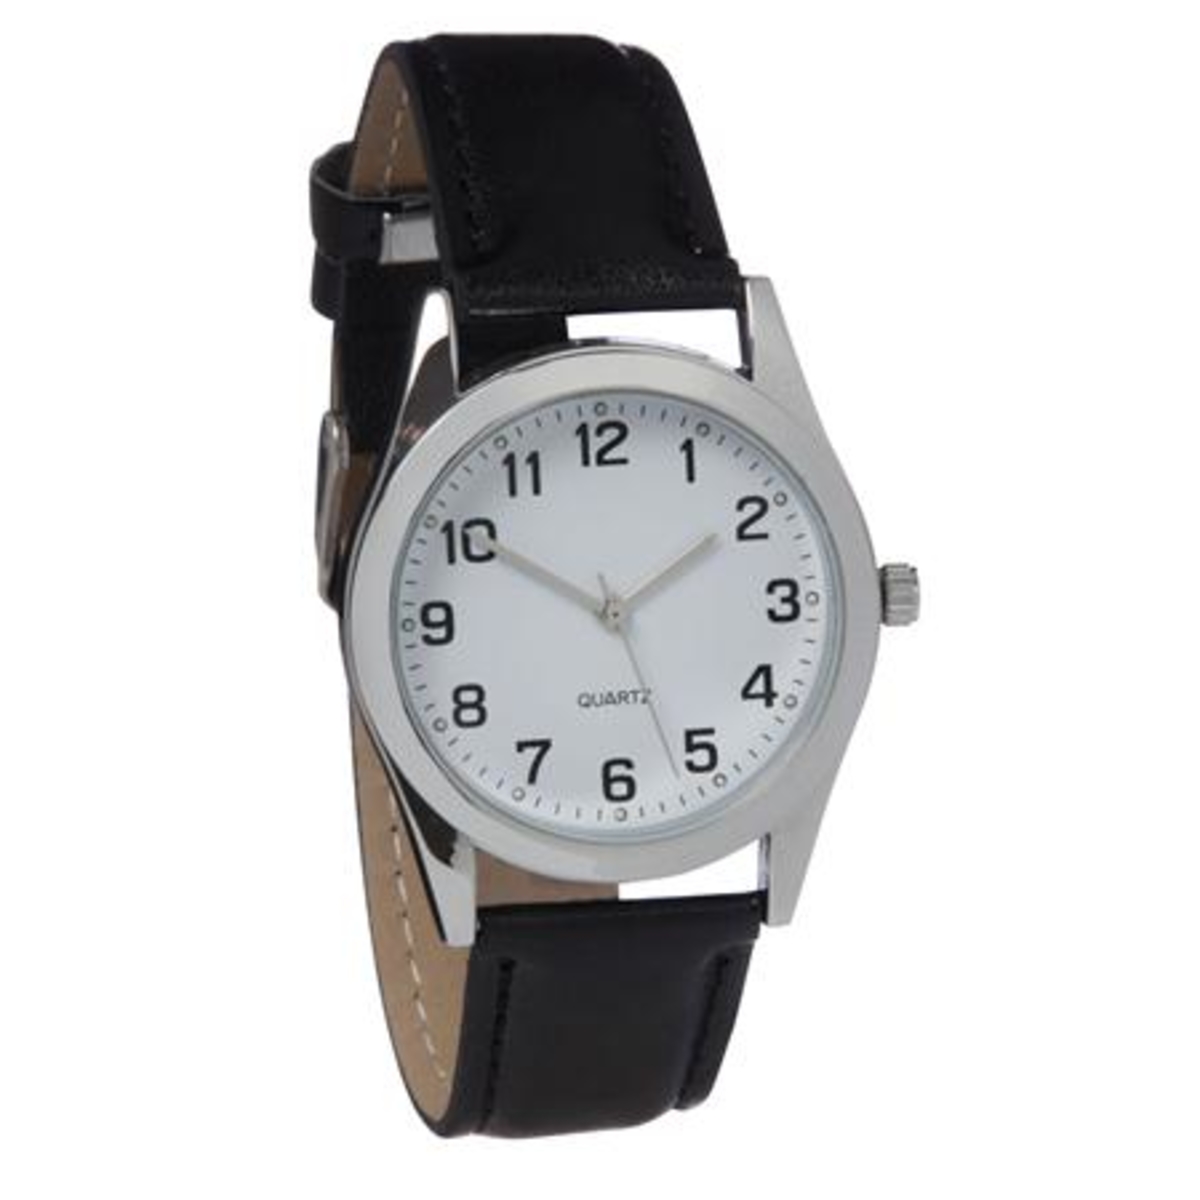 Analogue Watch - Black and Silver Look | Kmart